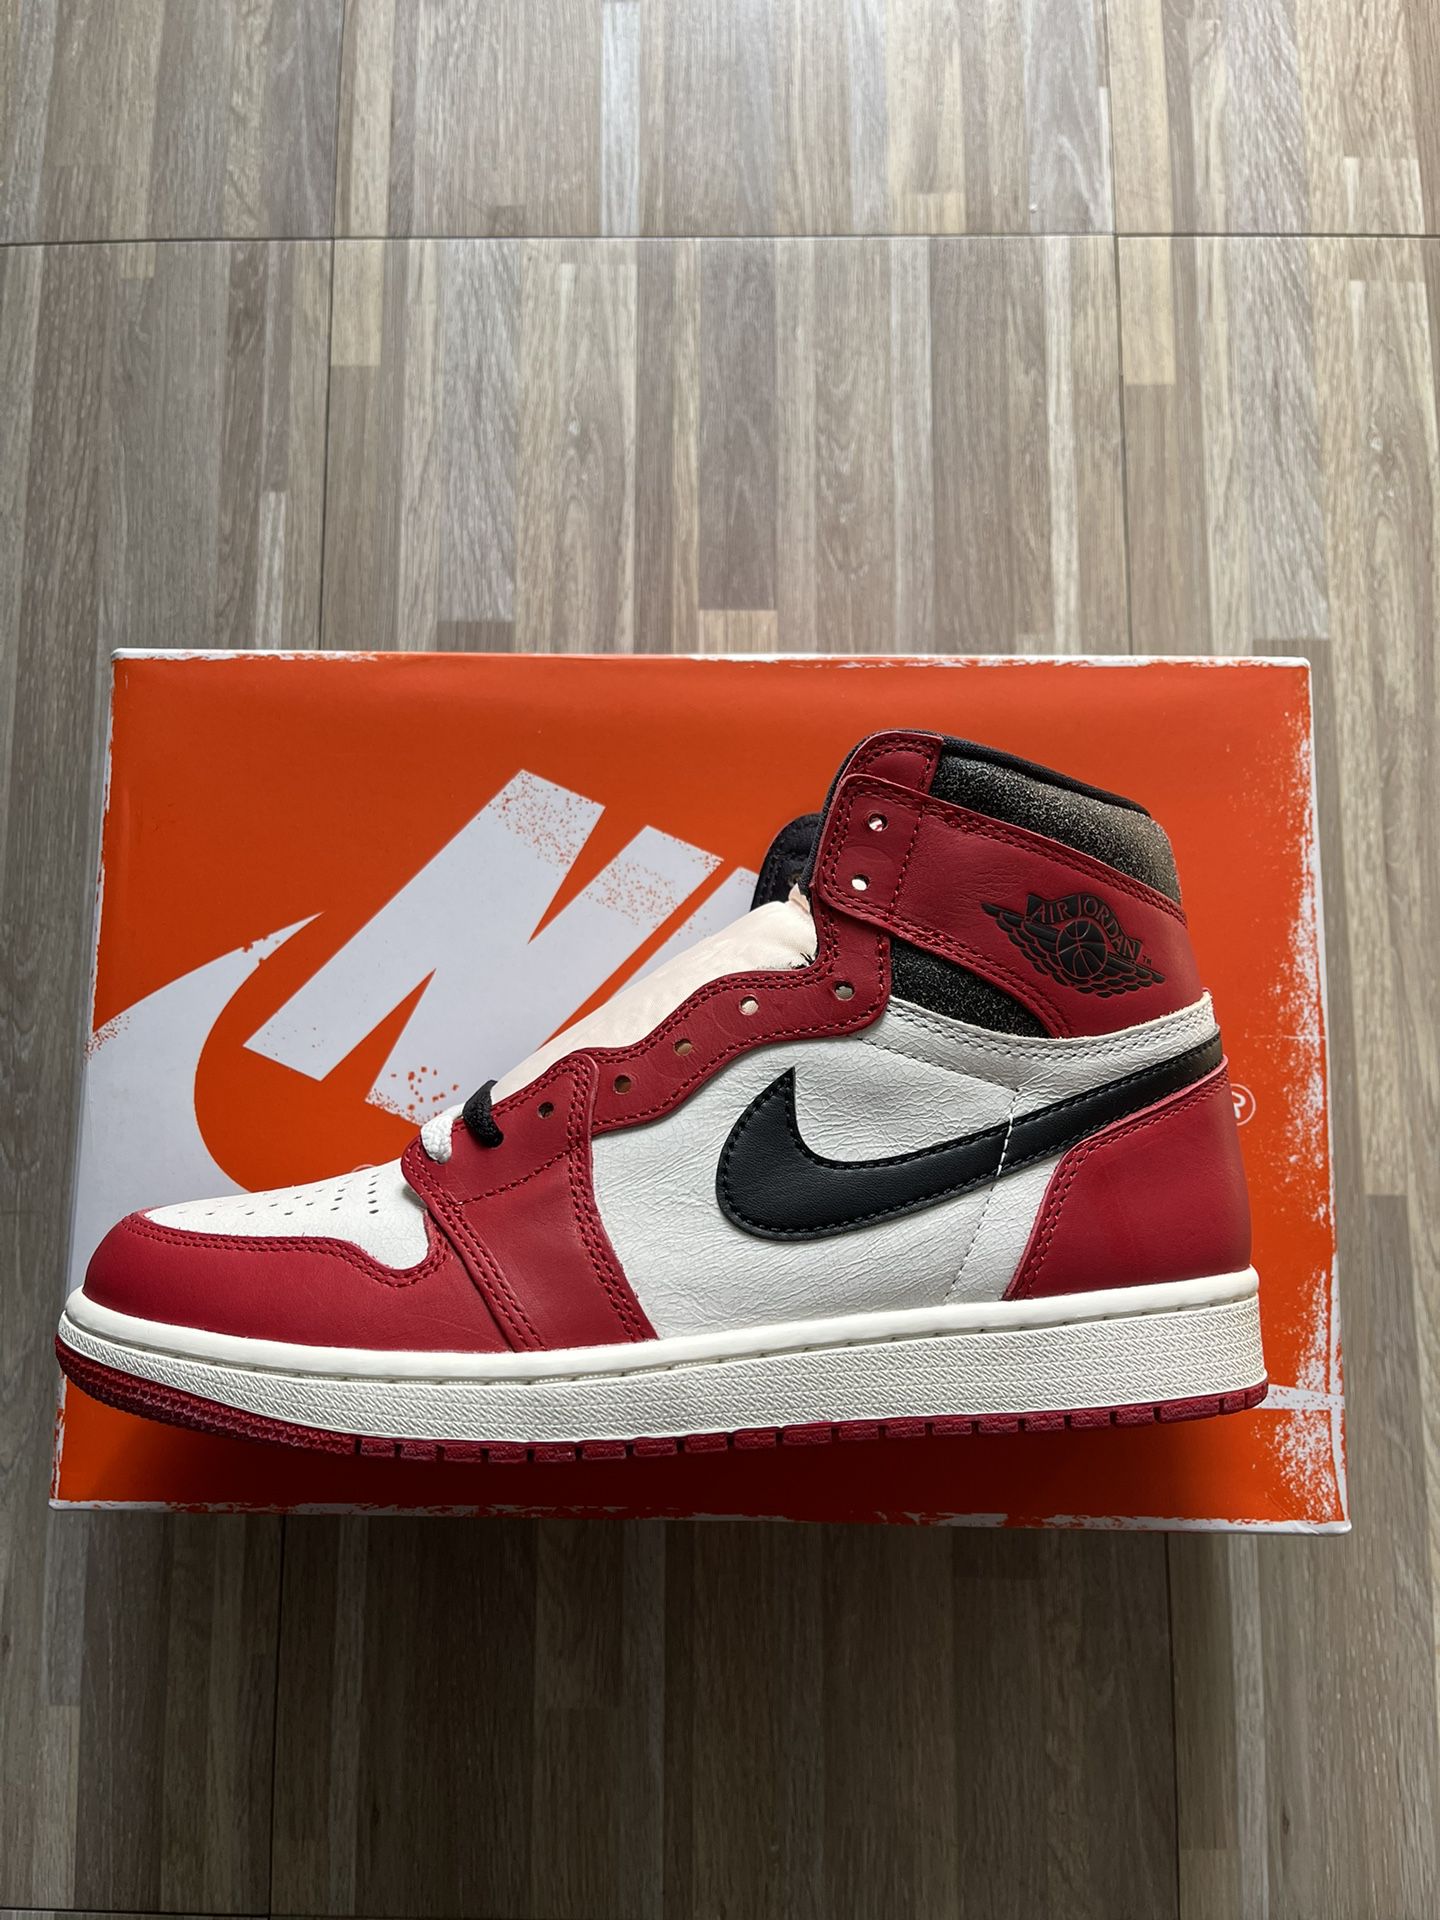 Jordan 1 Chicago Lost And Found 